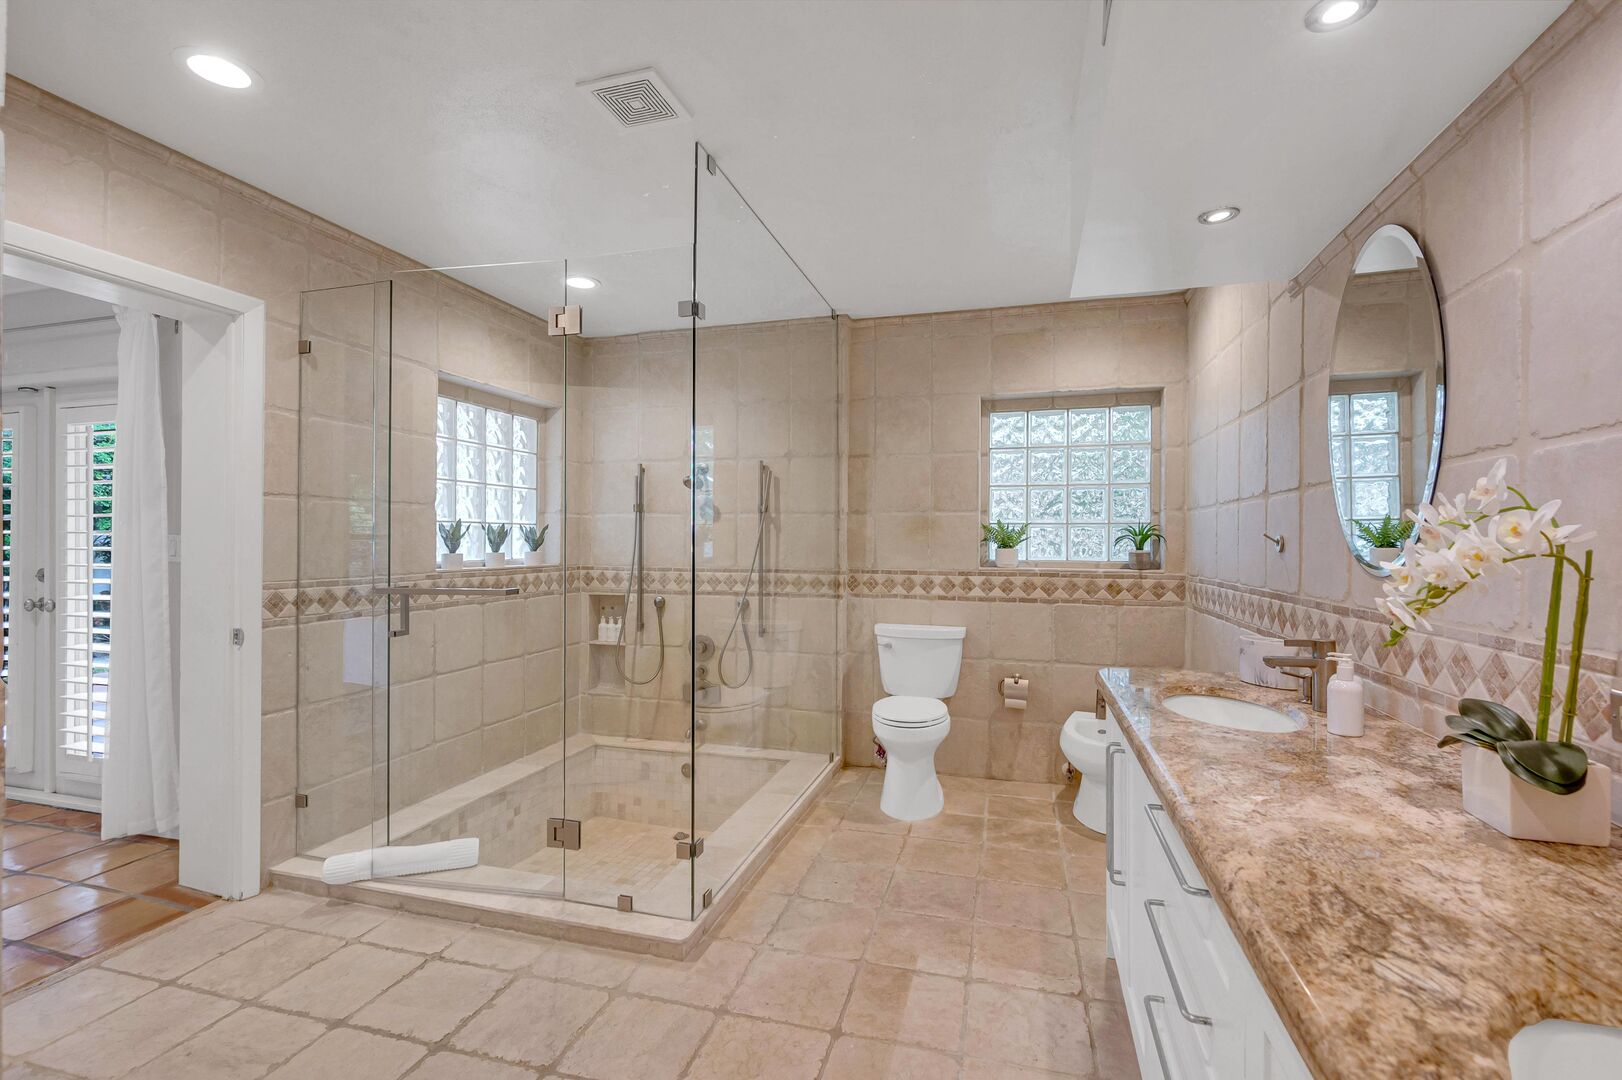 The master bathroom features a double vanity and a step in shower that can double as a large tub.